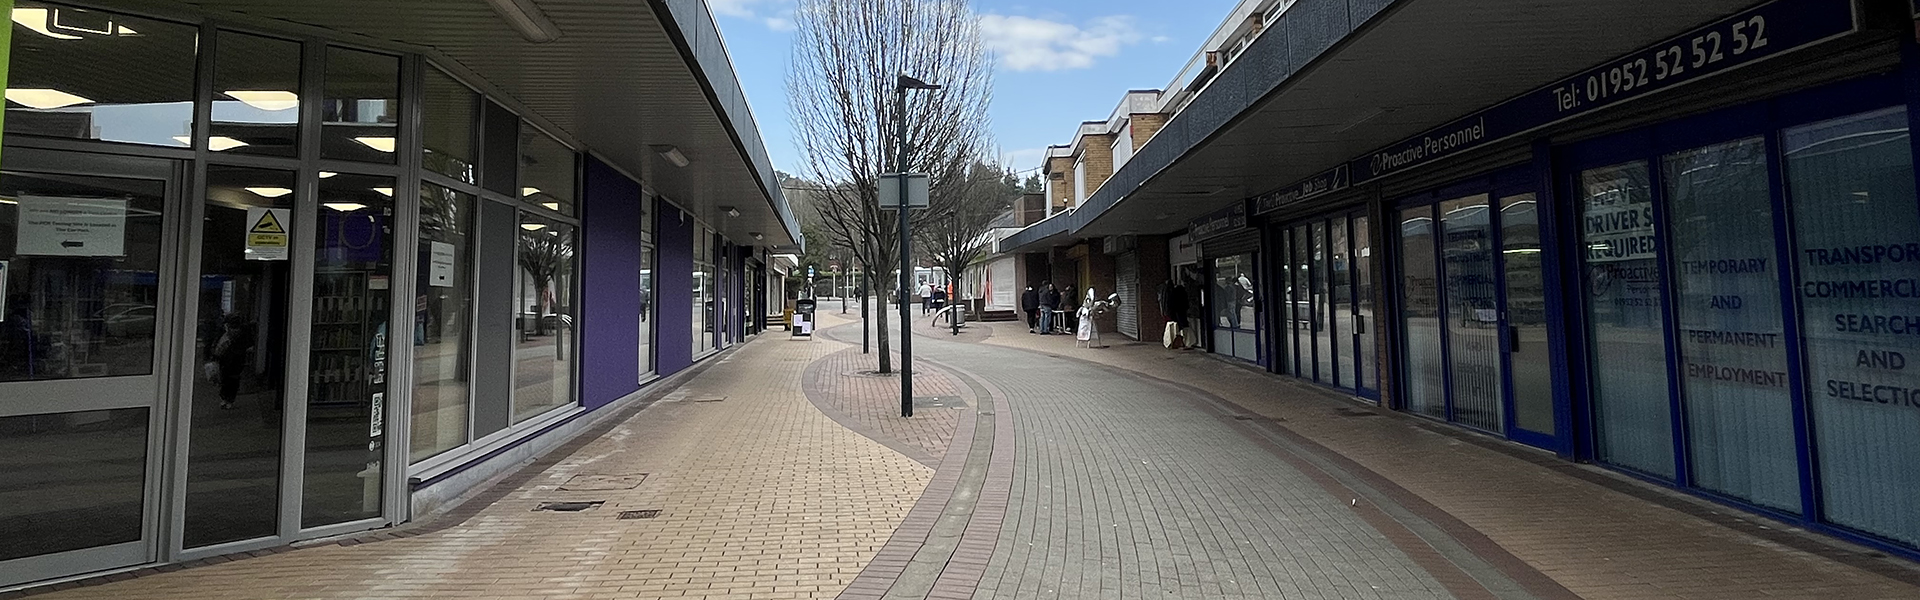 A photograph of the buildings and walkways in Oakengates Town Centre